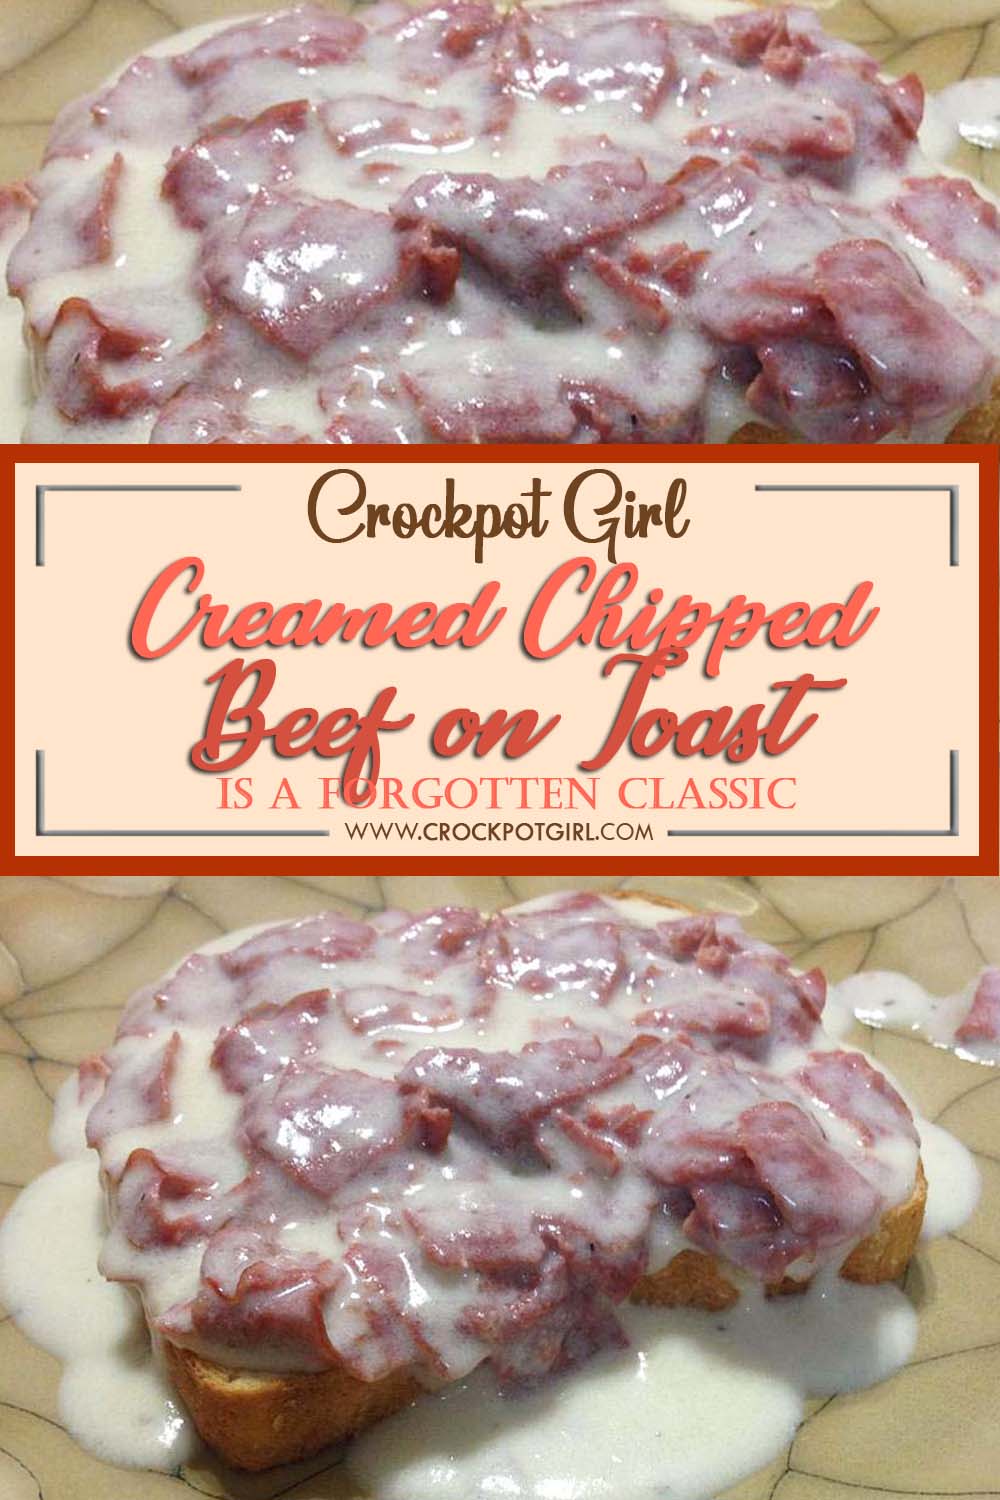 Creamed Chipped Beef on a Toast Recipe